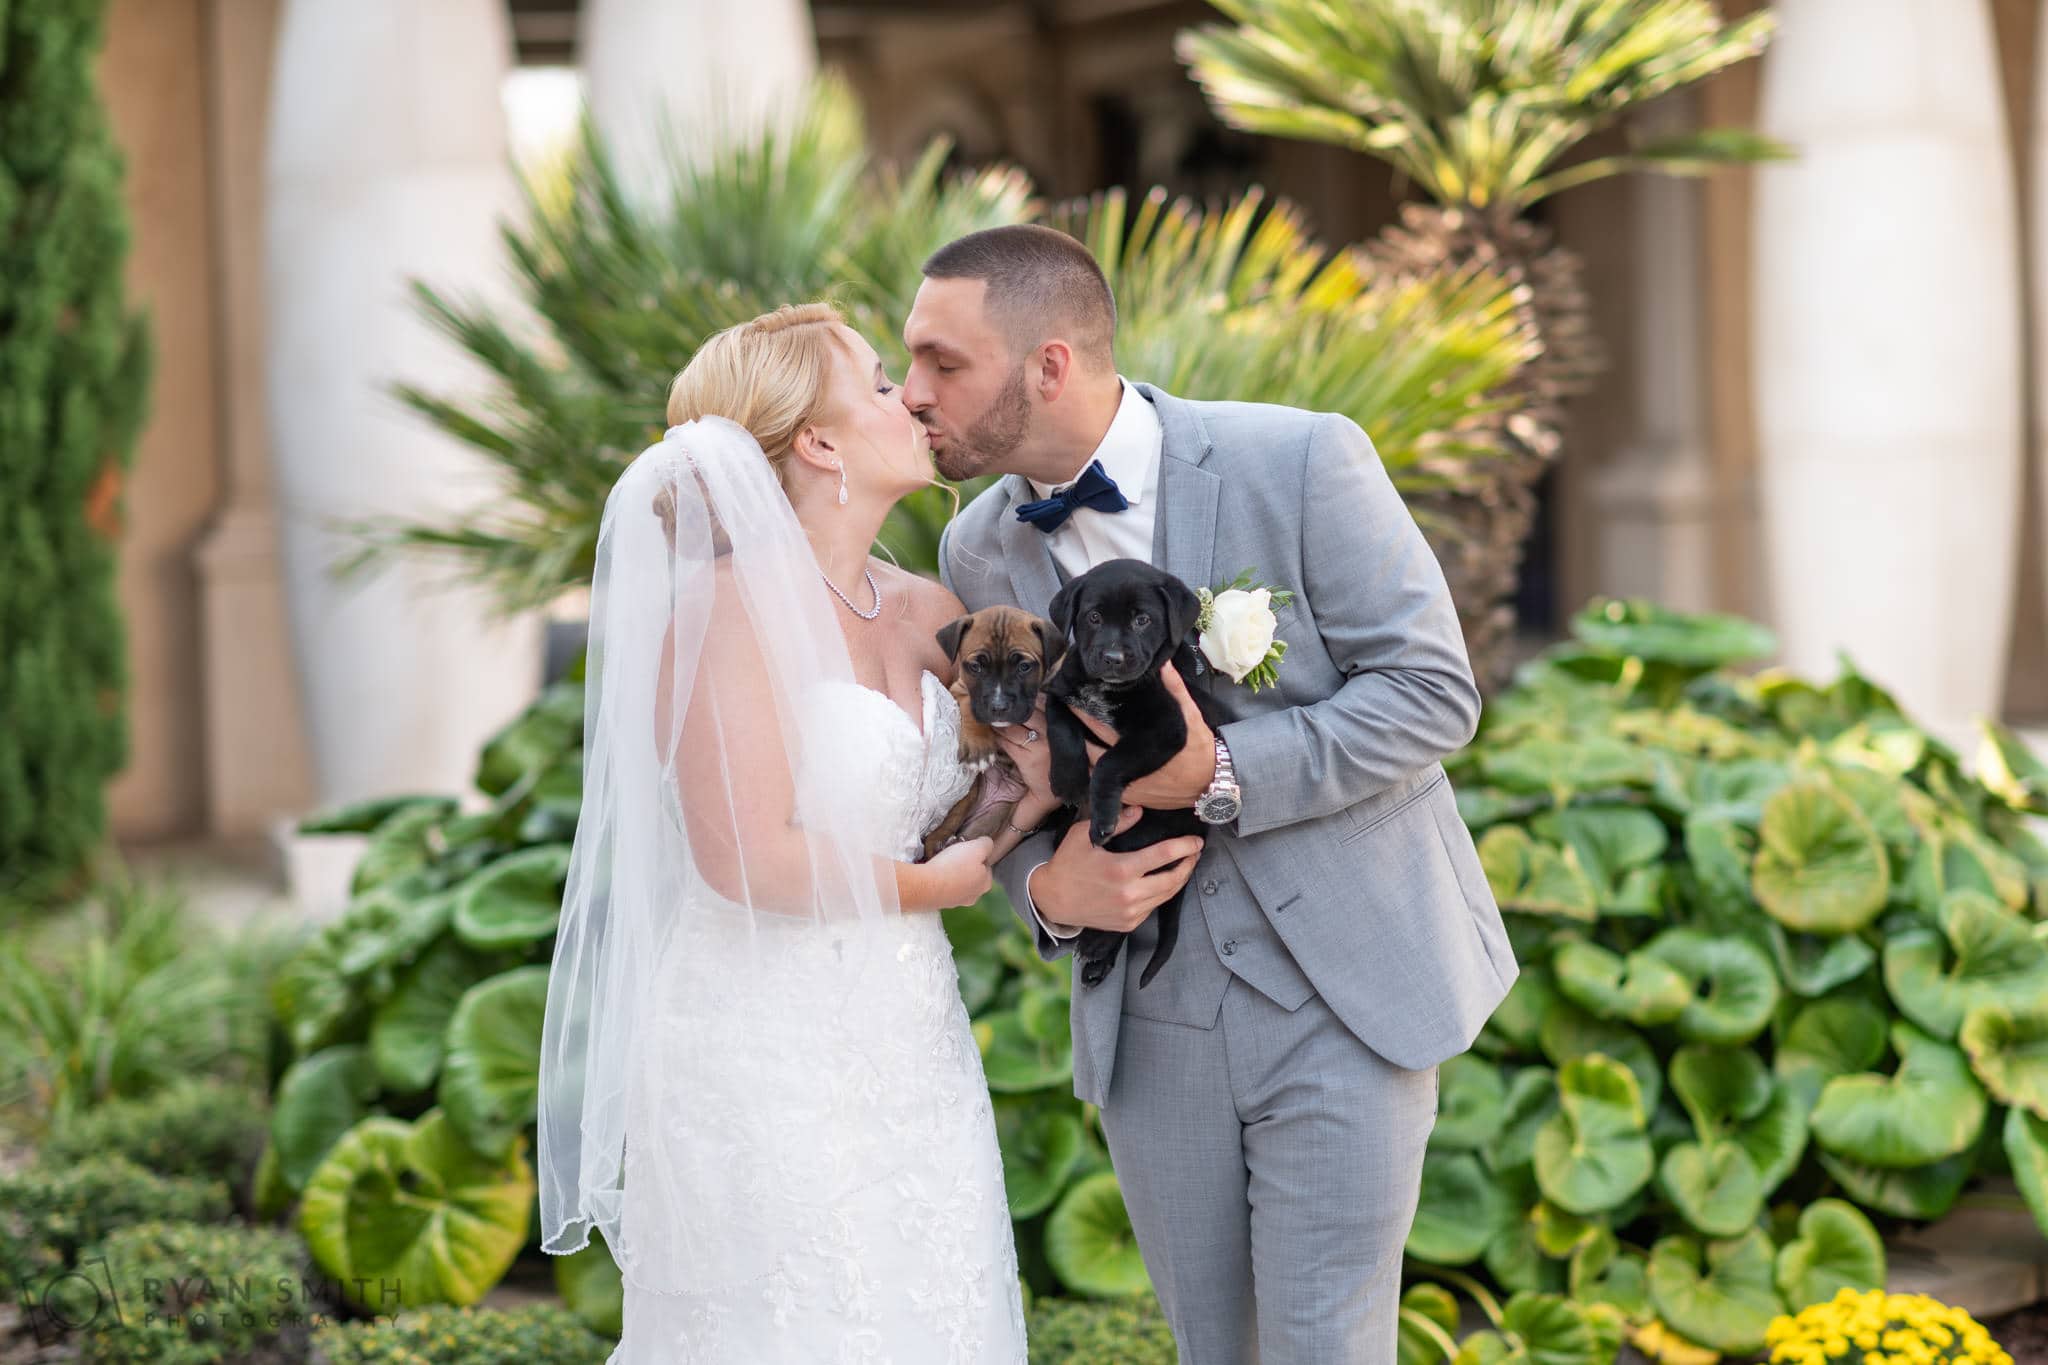 Bride and groom kissing with the puppies - 21 Main Events - North Myrtle Beach